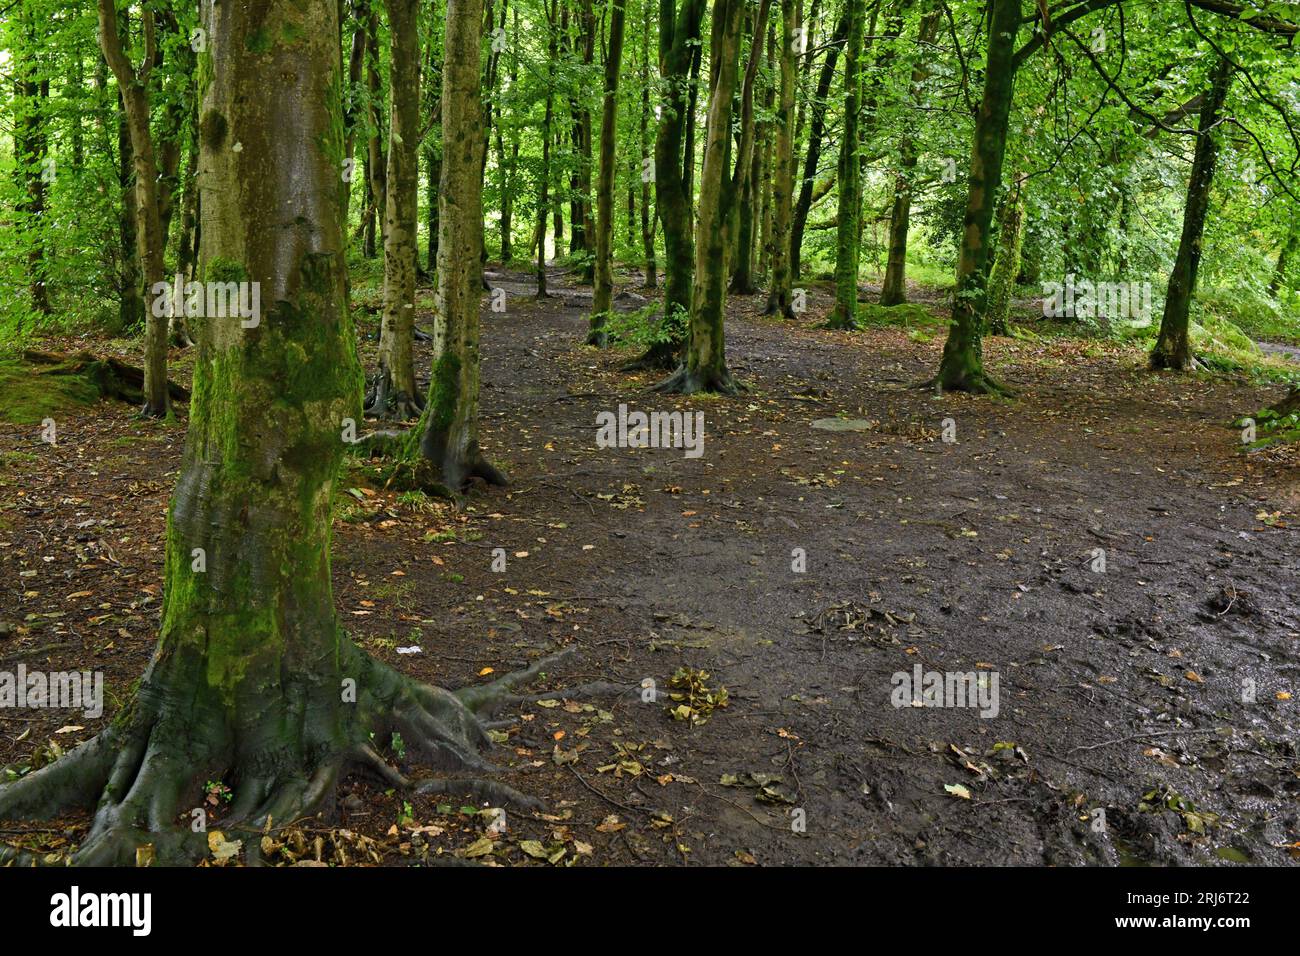 One of the many Wentwood Pathways along with planty of trees in which to walk and weave about  - the Wentwood forest is large. Stock Photo